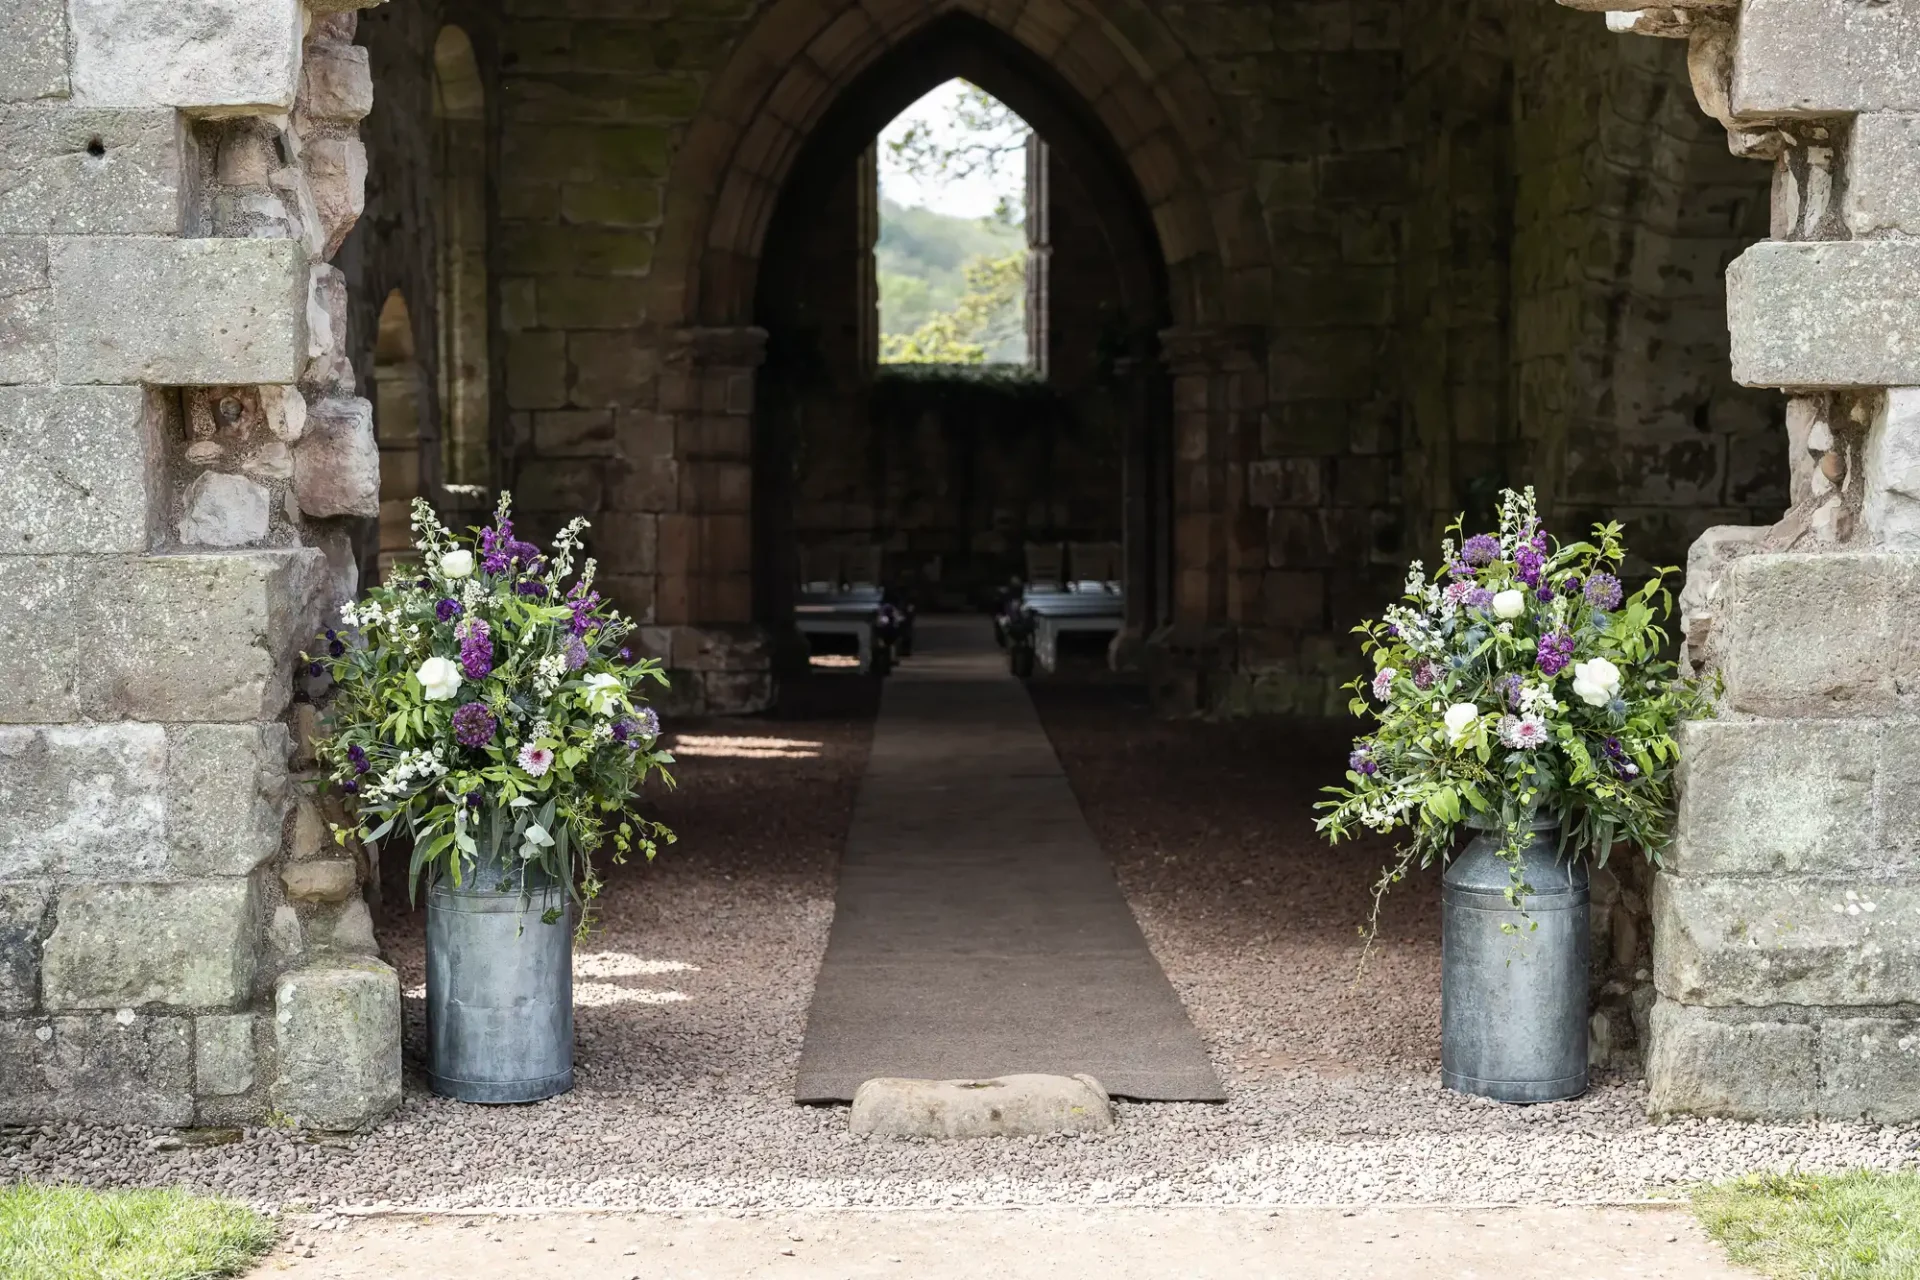 A stone archway leads to an interior space with two large floral arrangements in galvanized metal containers on either side of the entrance.